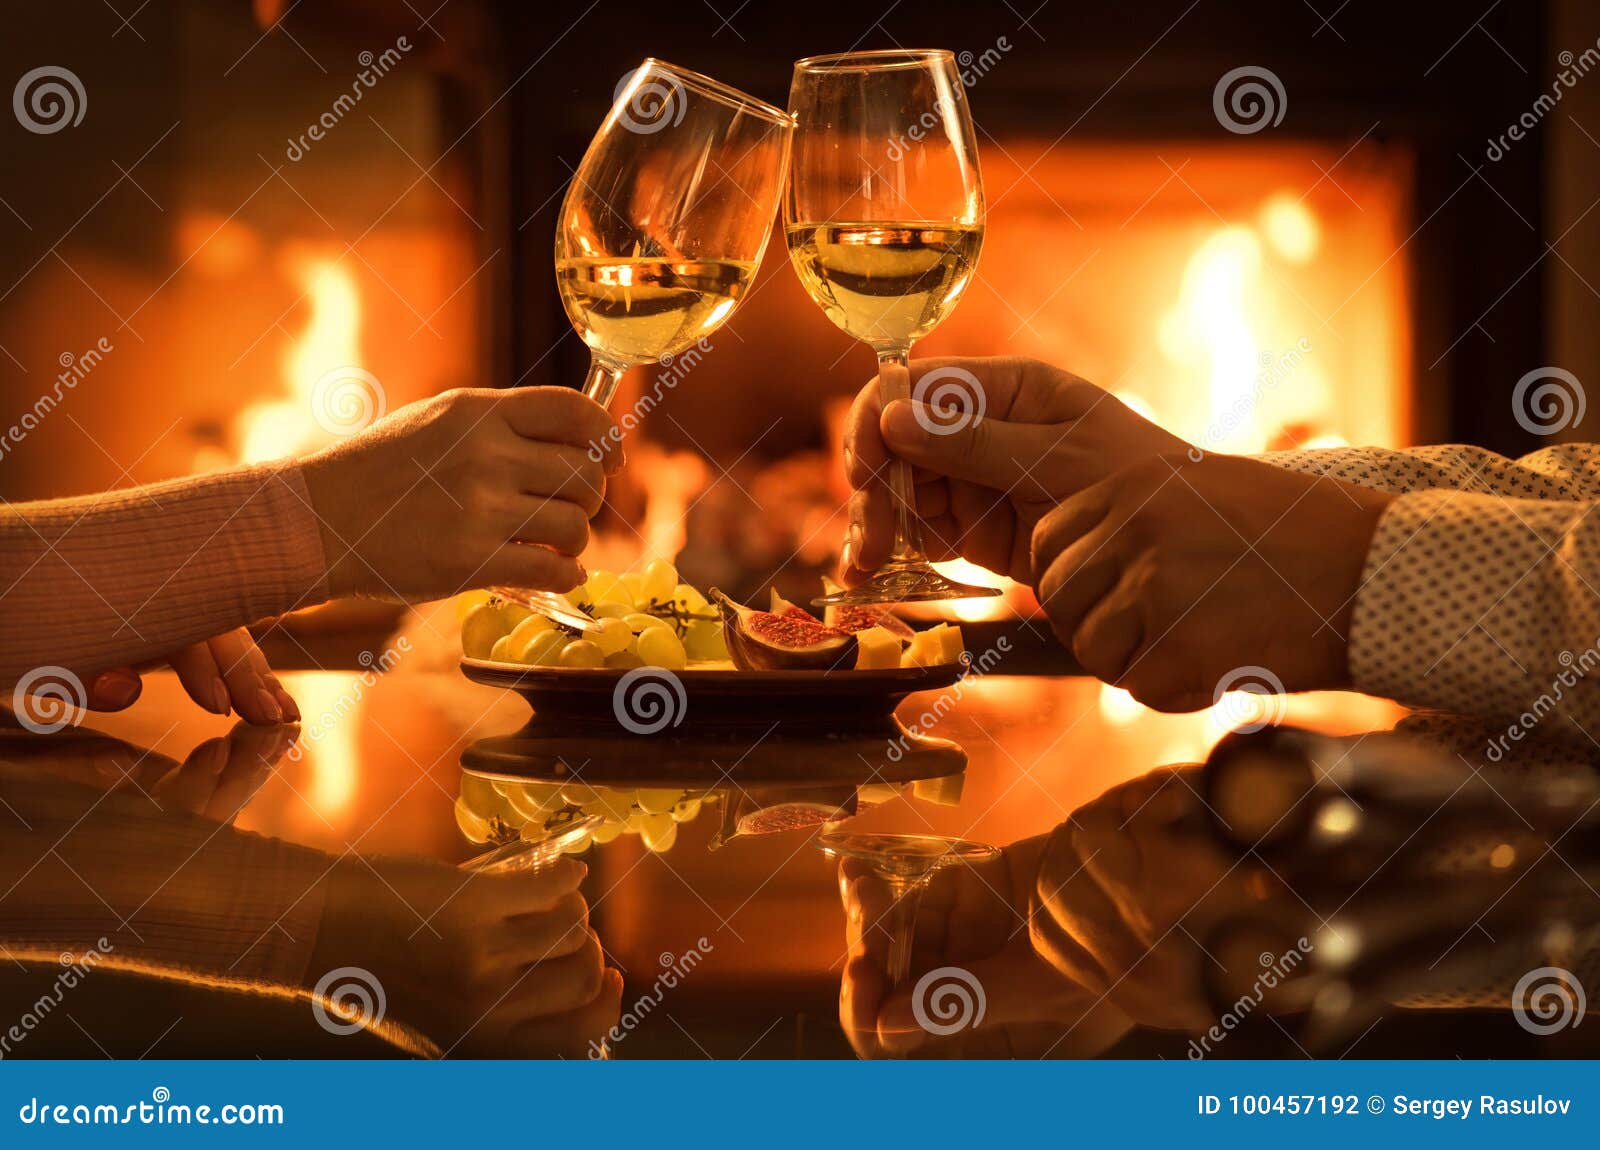 young couple have romantic dinner with wine over fireplace background.